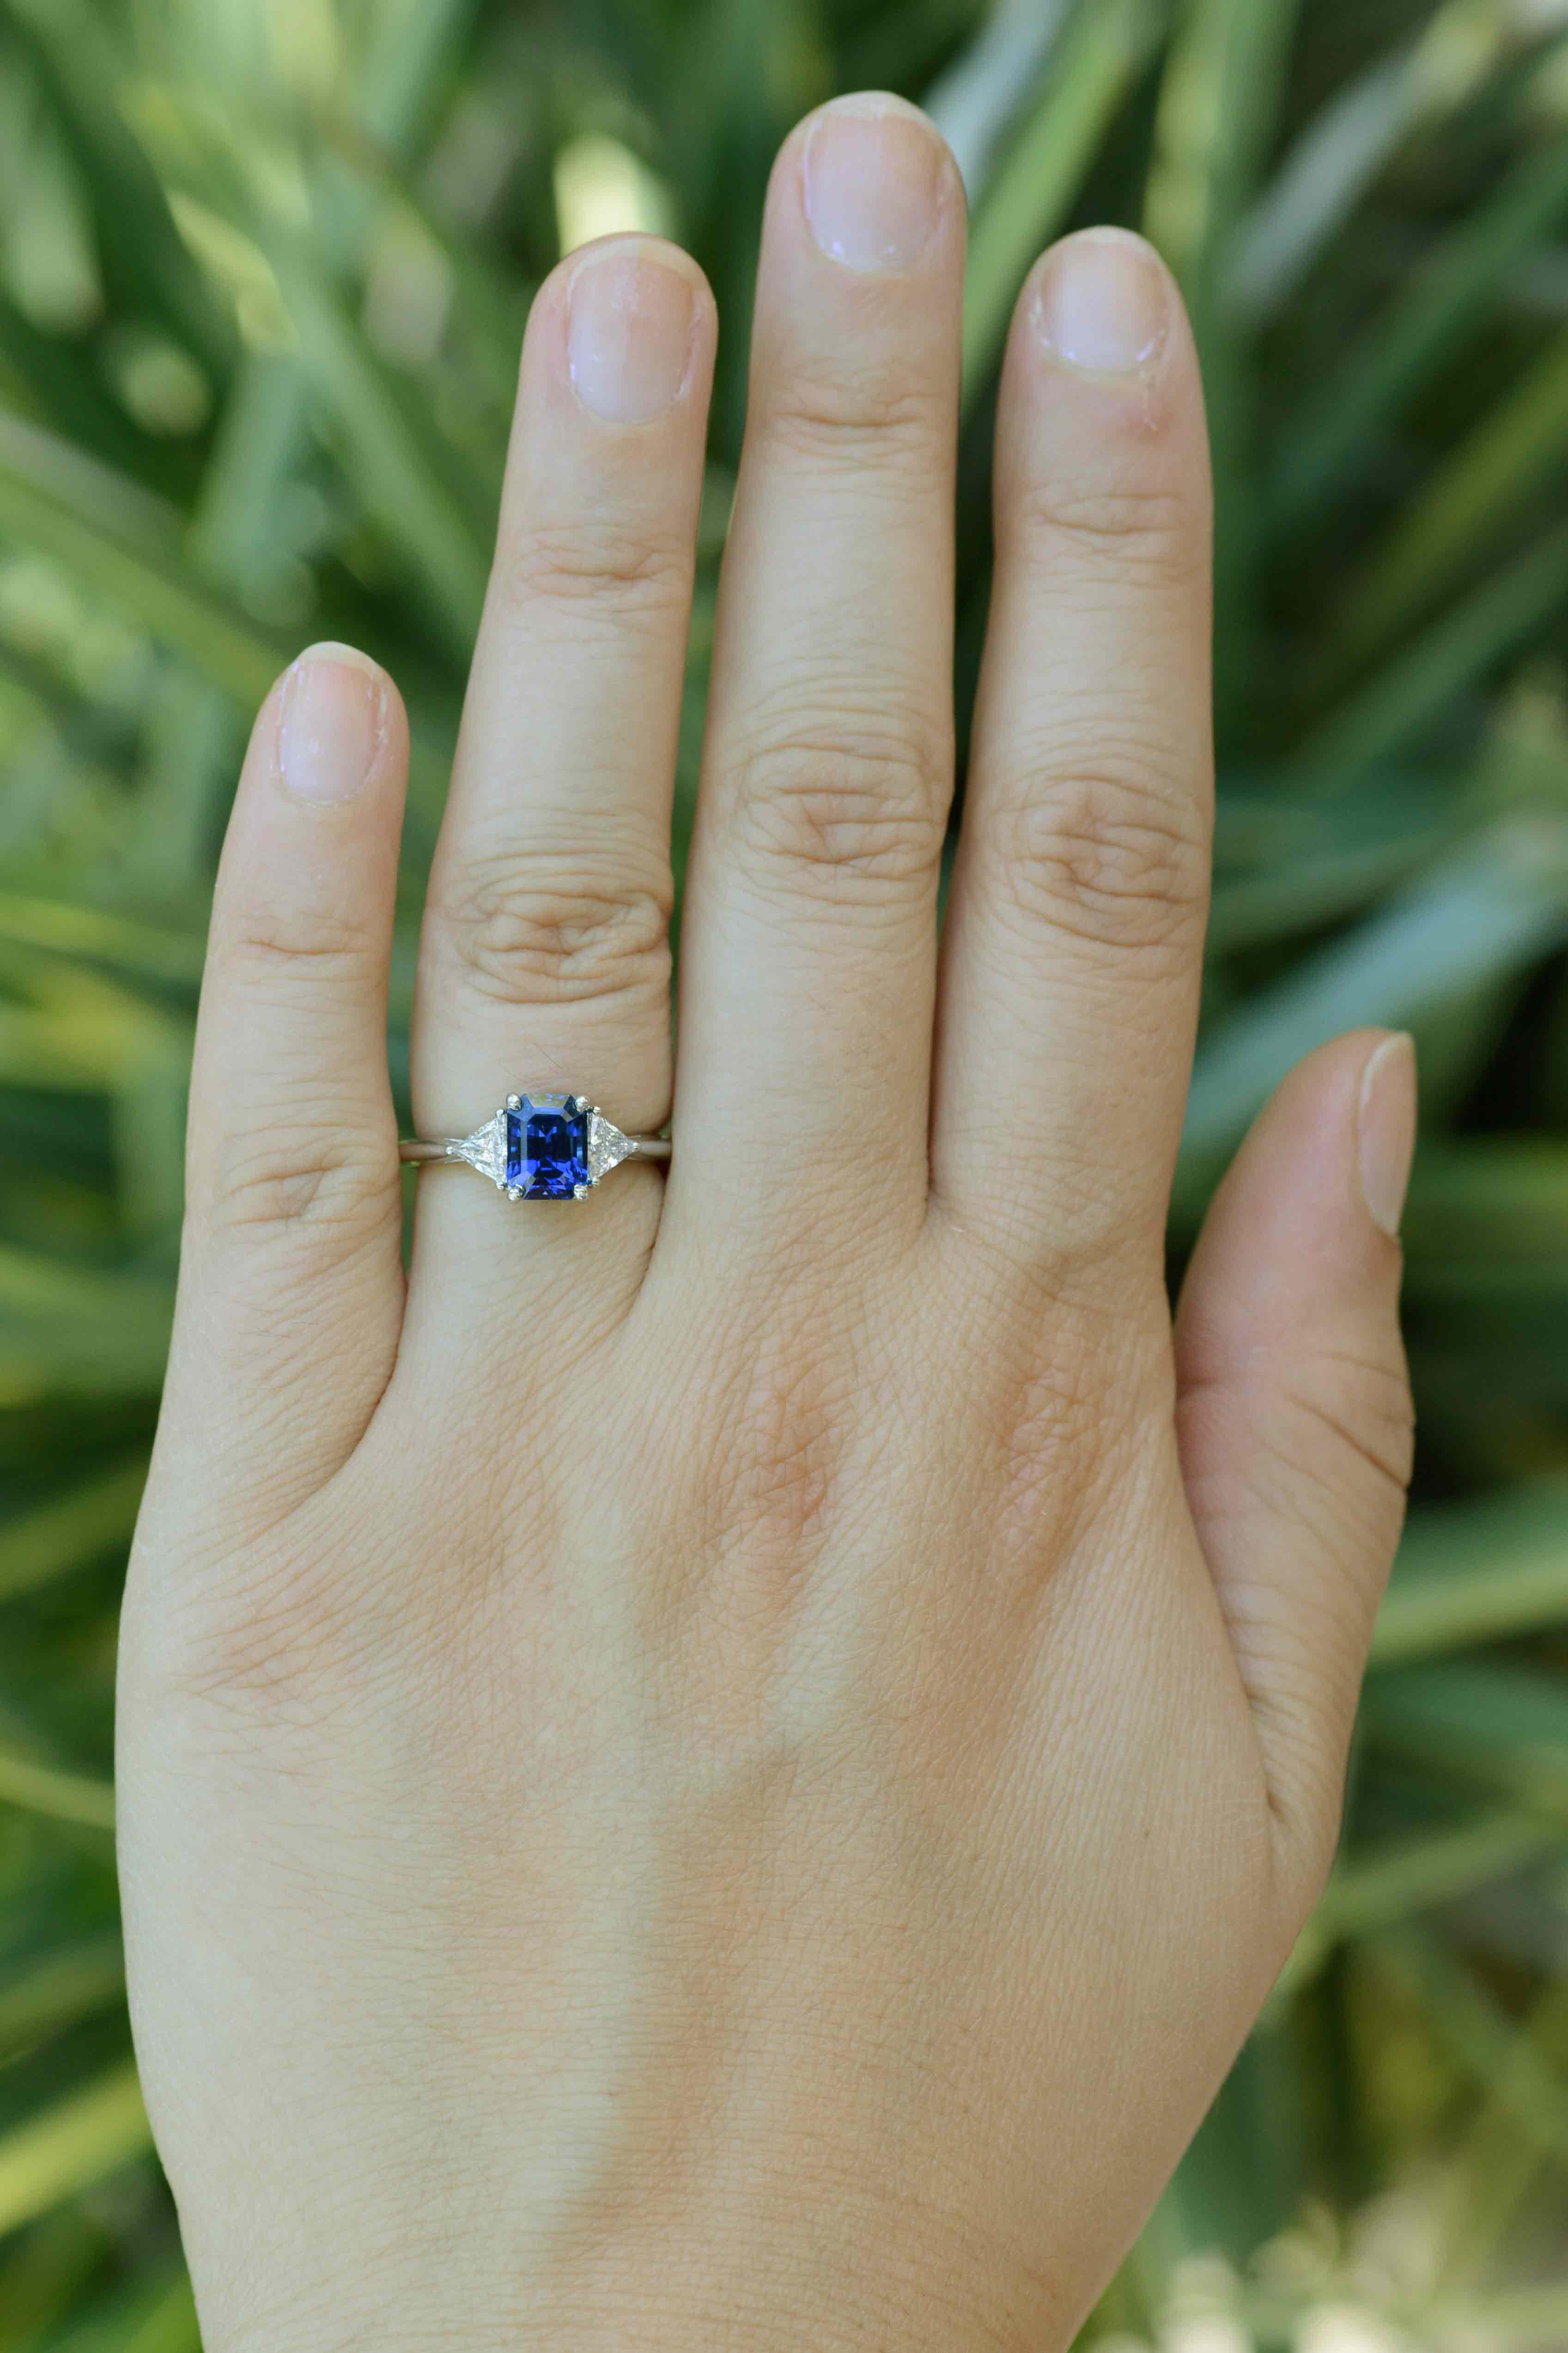 Signed Tiffany & Co. engagement ring. One luscious emerald cut sapphire weighting 2.13 carats takes the spotlight. Two triangular brilliant cut diamonds accent the bright blue gemstone. Examined and tested by the Tiffany Gemological Laboratory. Made